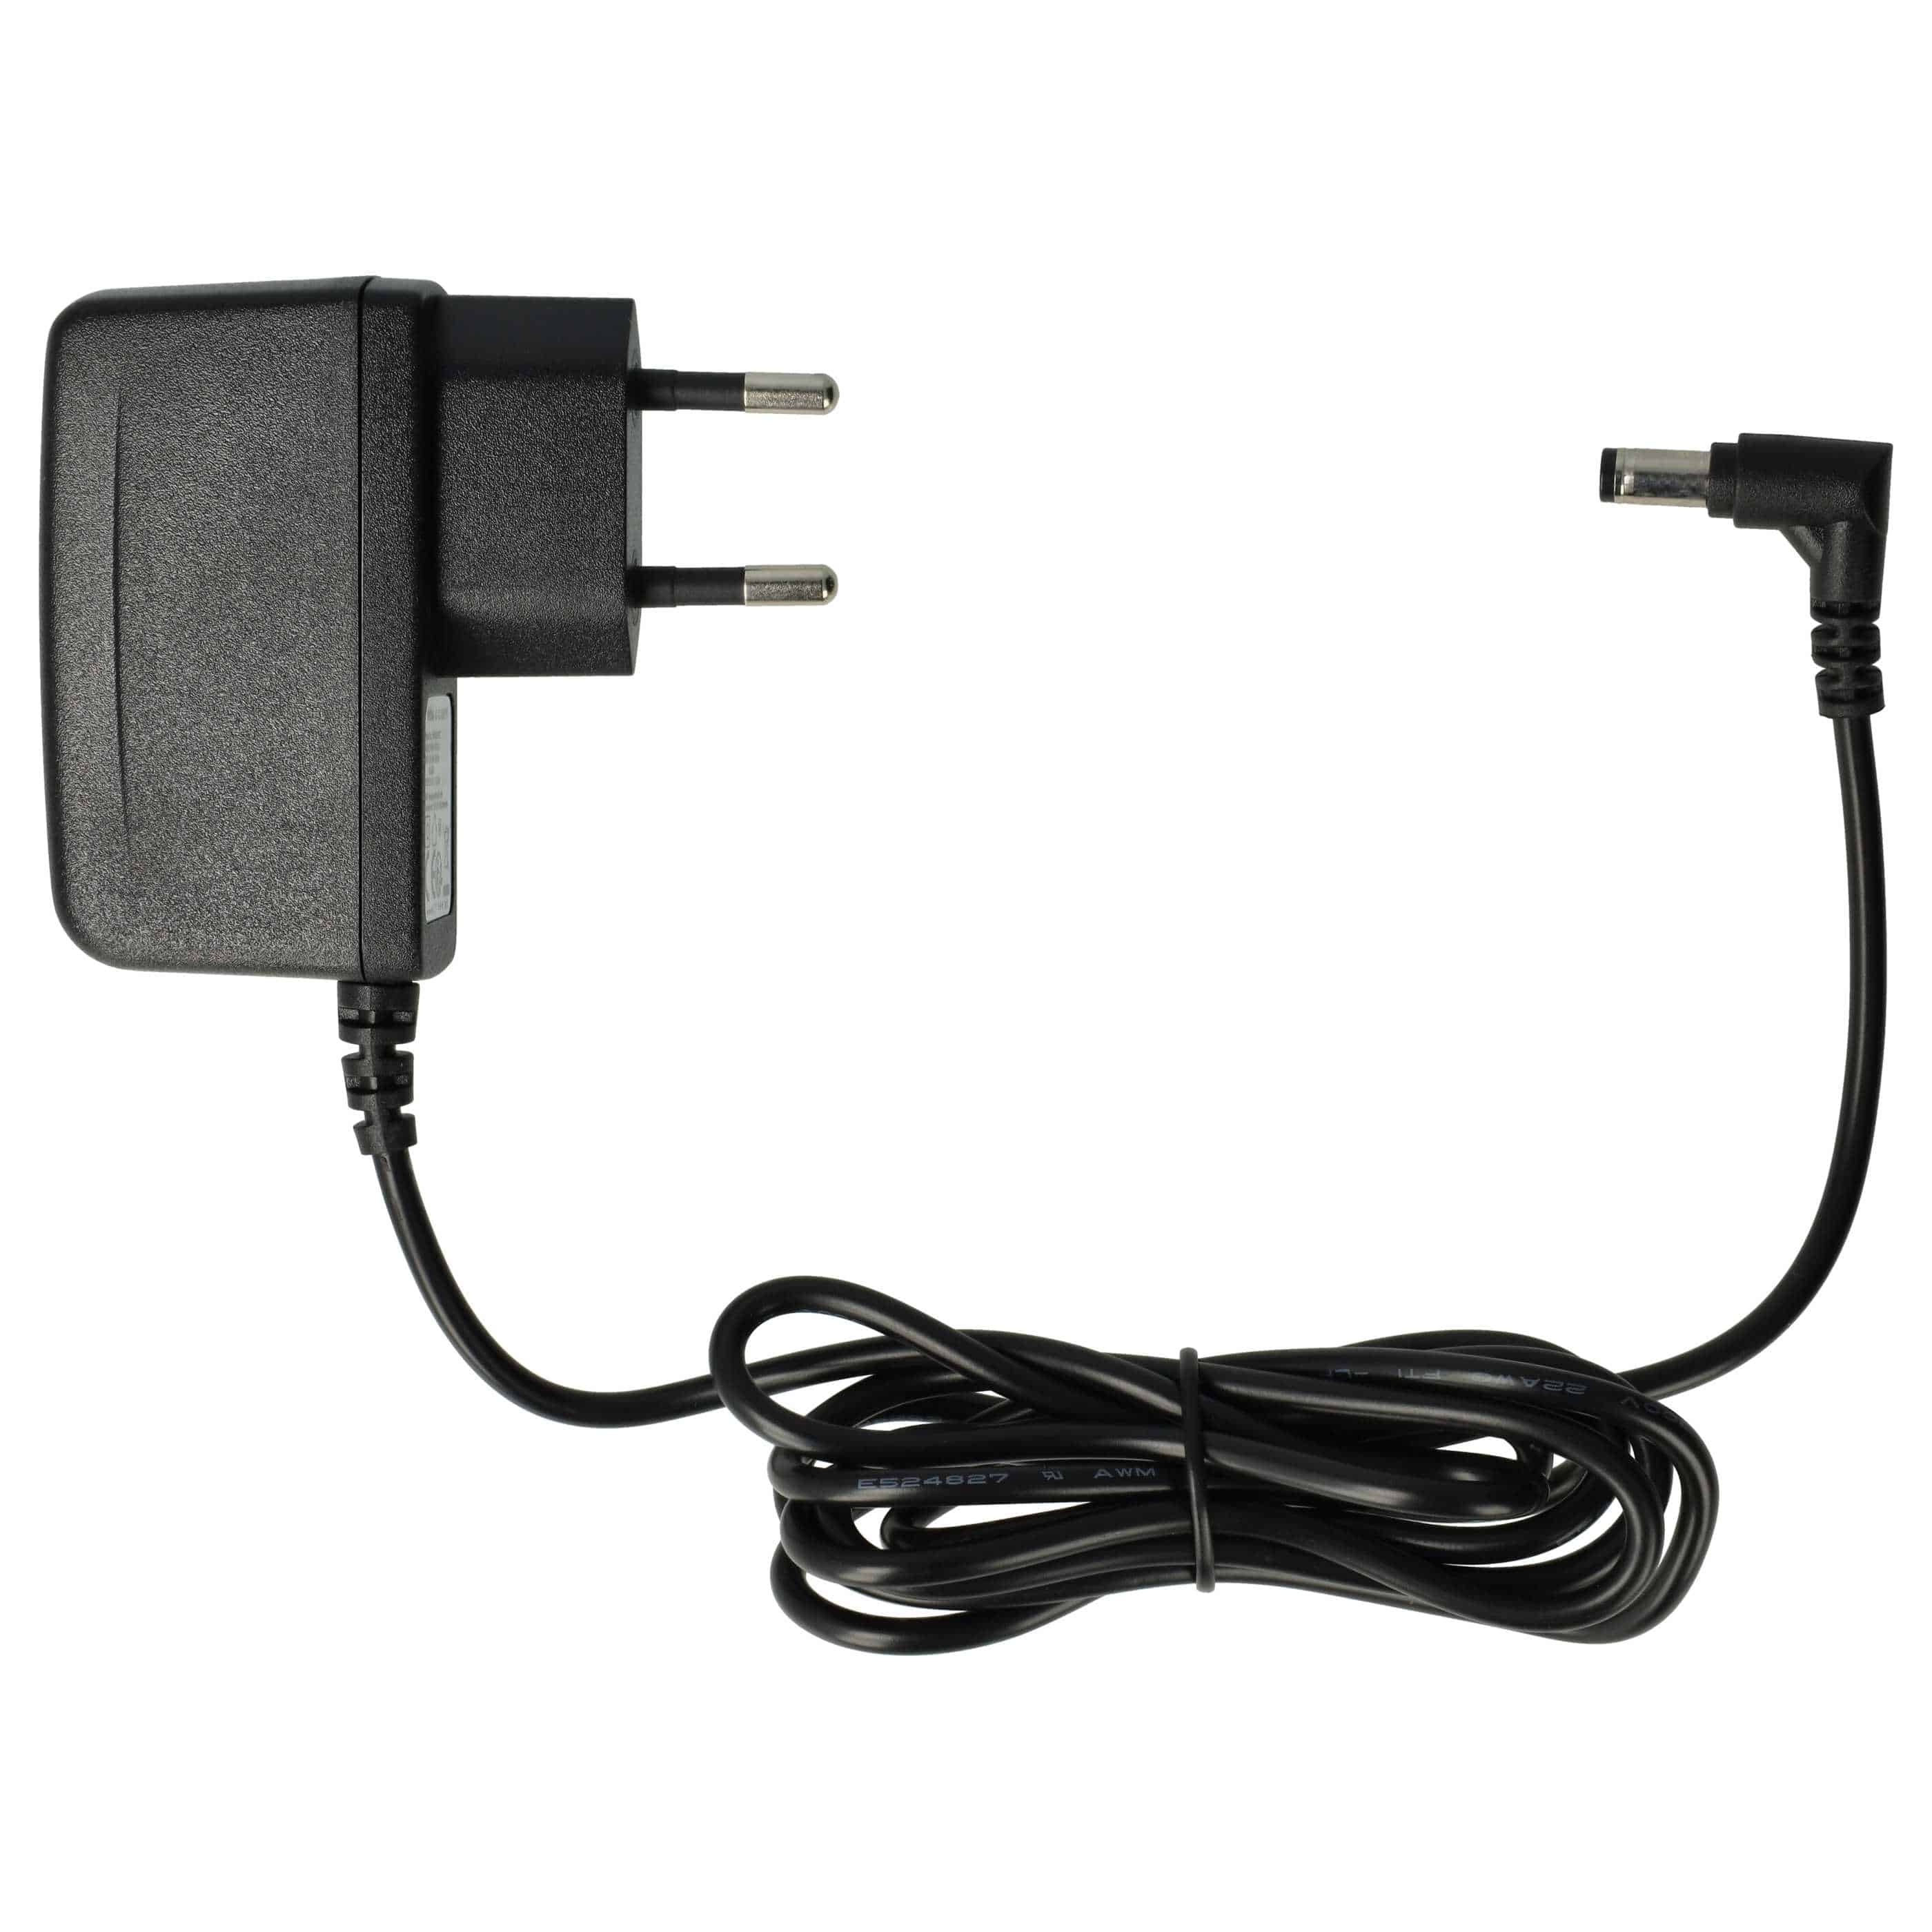 Mains Power Adapter replaces Tiptel 3054061 for TipTel Landline Telephone, Home Telephone - 145 cm